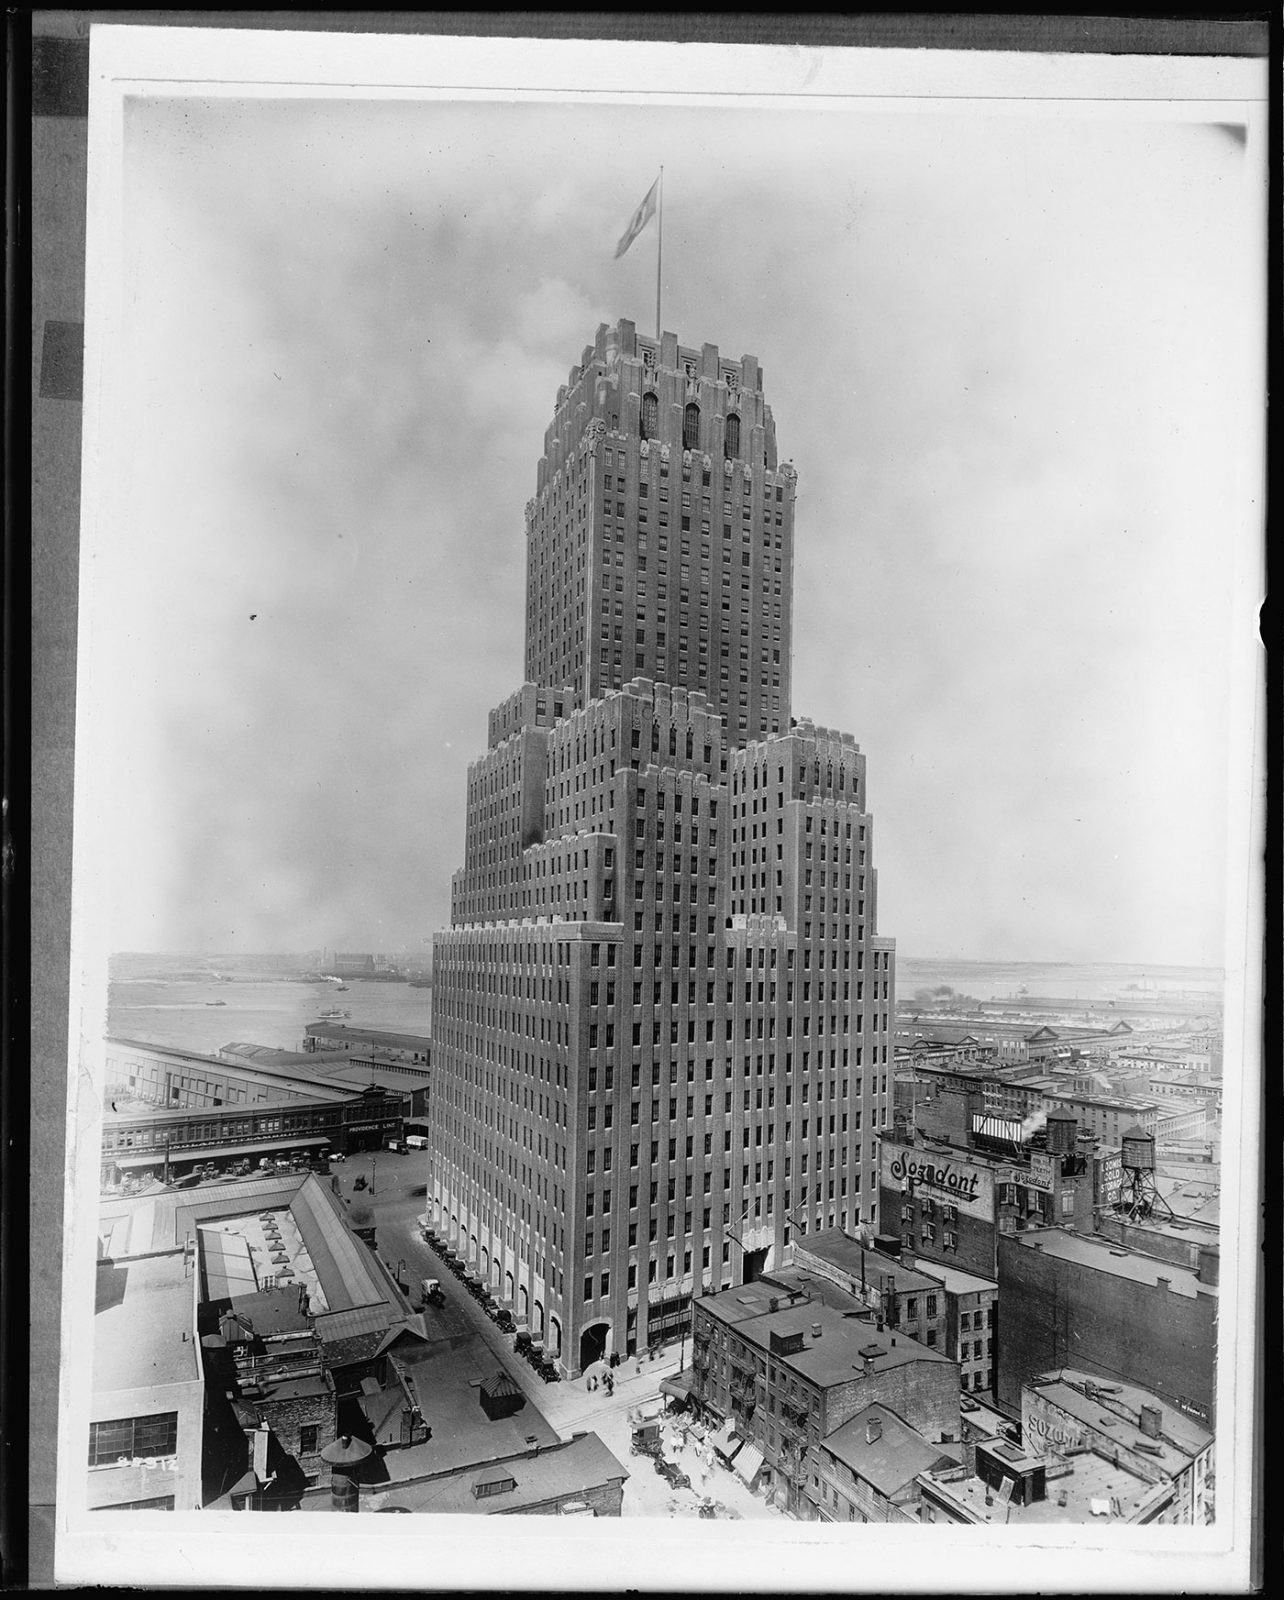 Barclay-Vesey Building, 1926